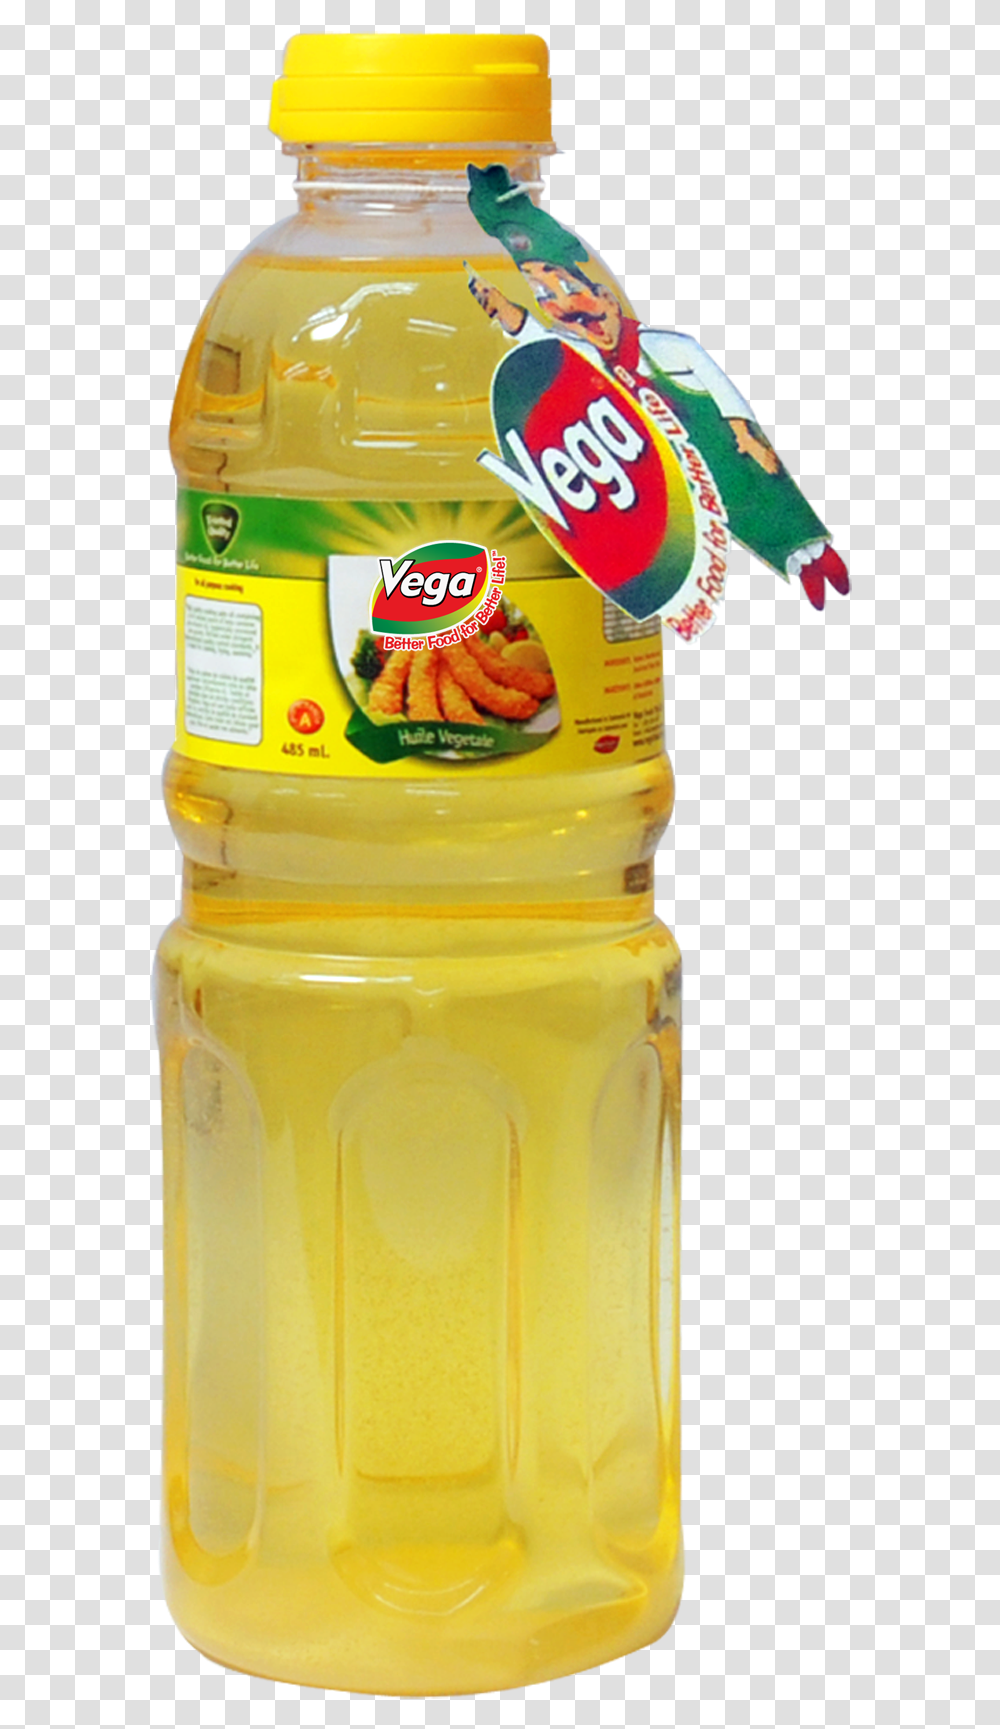 Affordable Cooking Oil In Pure Golden Colour Convenience Food, Milk, Beverage, Drink, Fire Hydrant Transparent Png